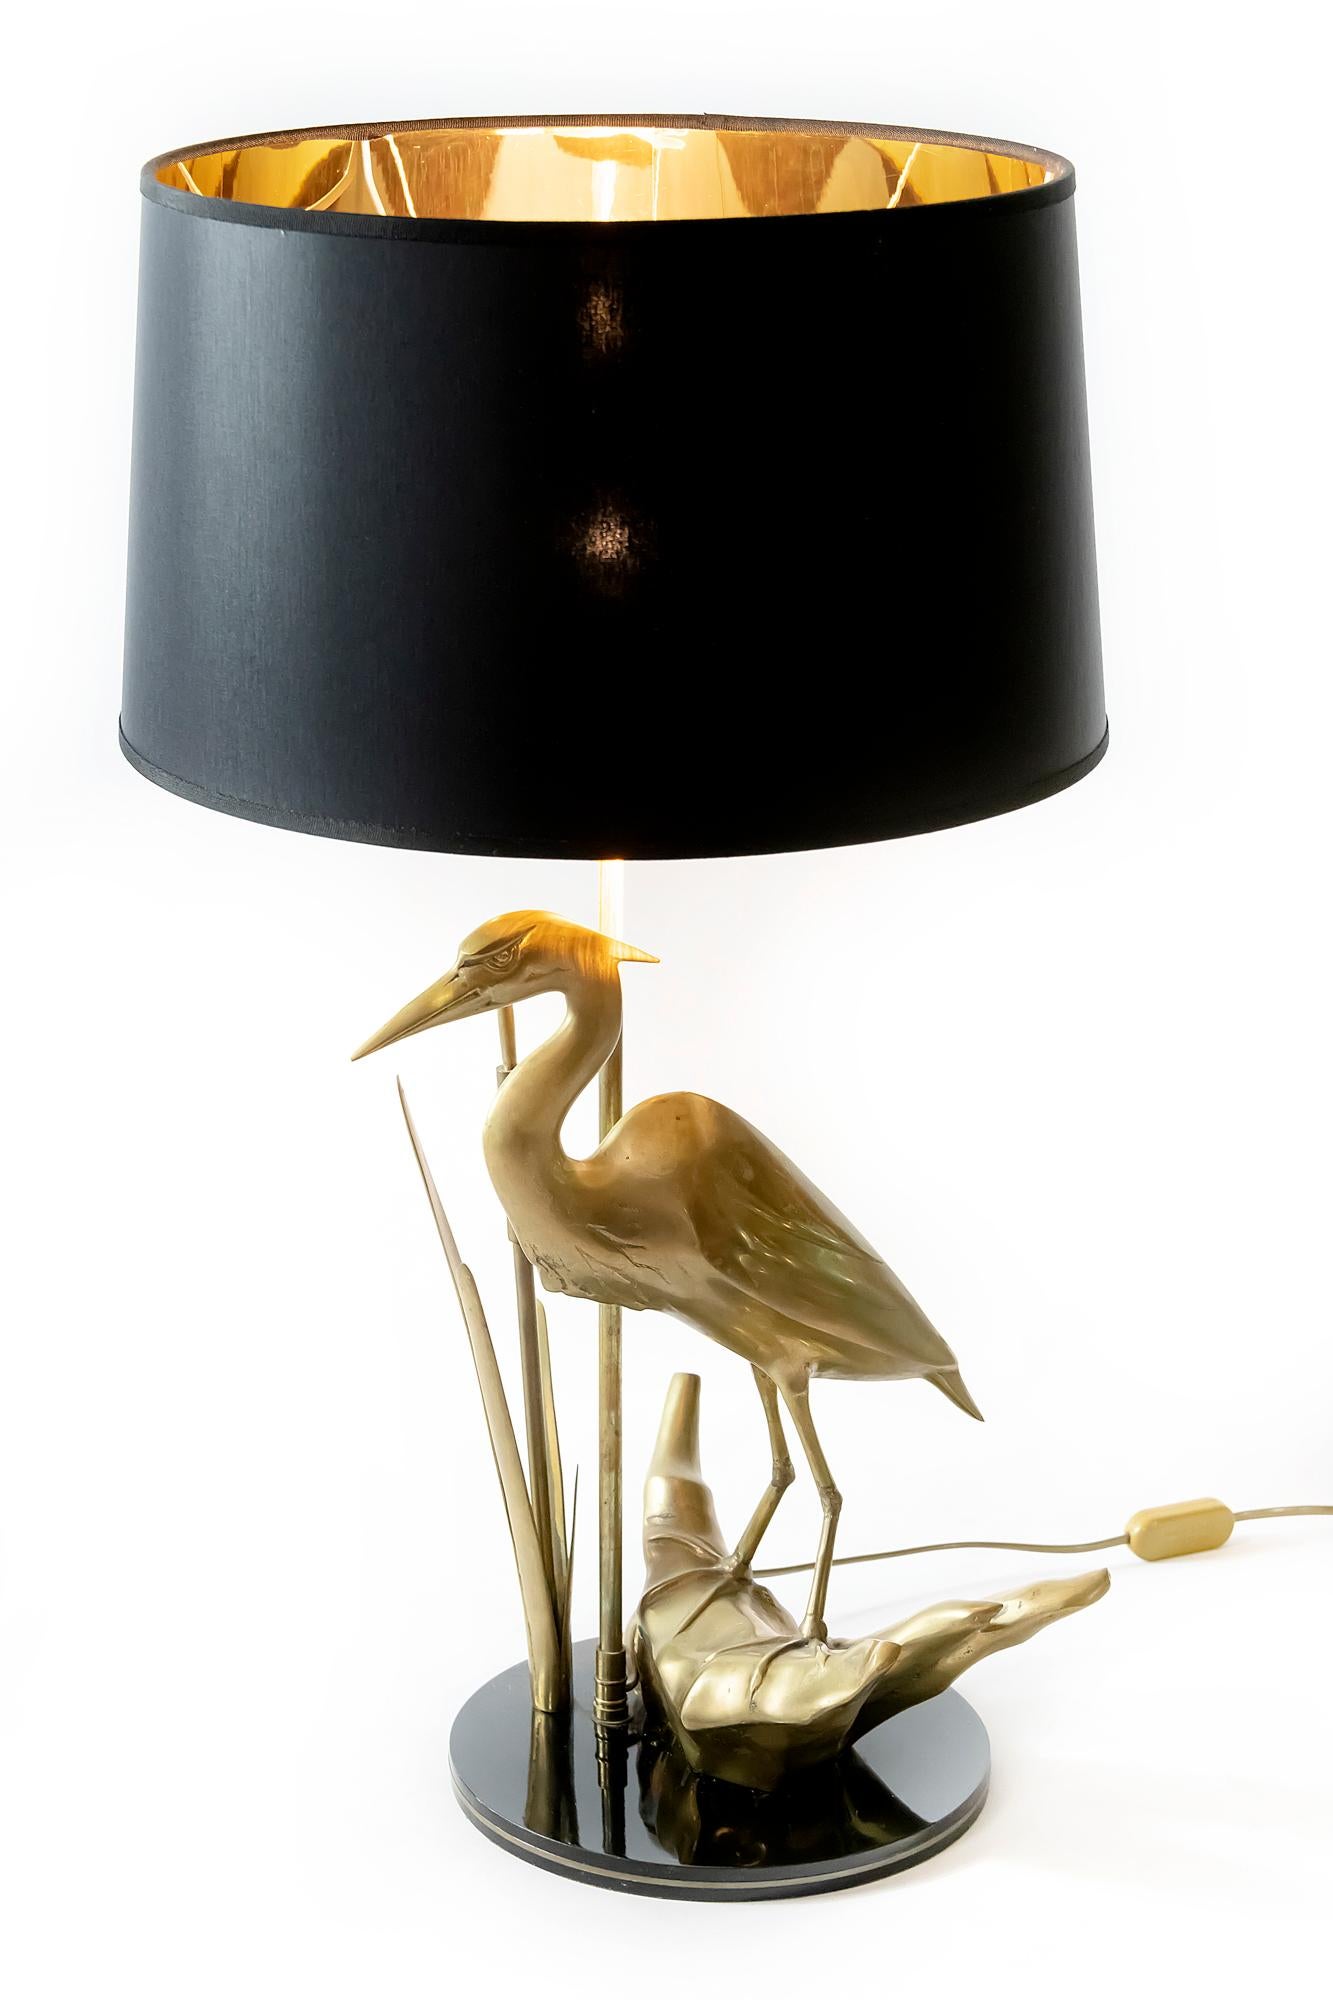 Vintage French table lamp with brass bird and floral decor on wooden base colored with glossy black, by Maison Charles.
Lamp is with the new made satin finish black color textile shade with gold inside.
Lamp includes E27 bulb.
  